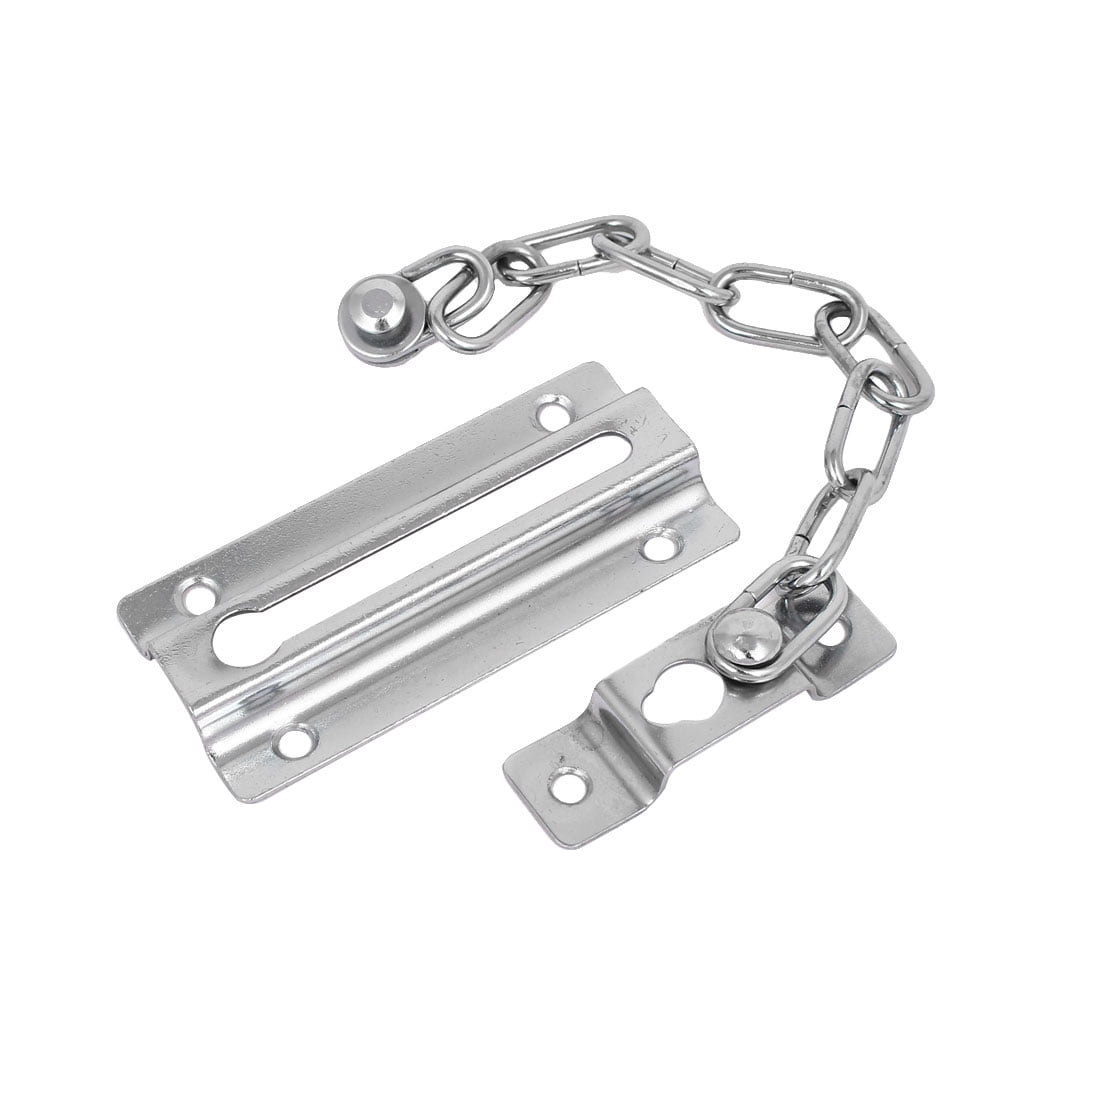 Home Store Security Slide Bolt Door Chain Lock Silver Tone 260mm Length ...